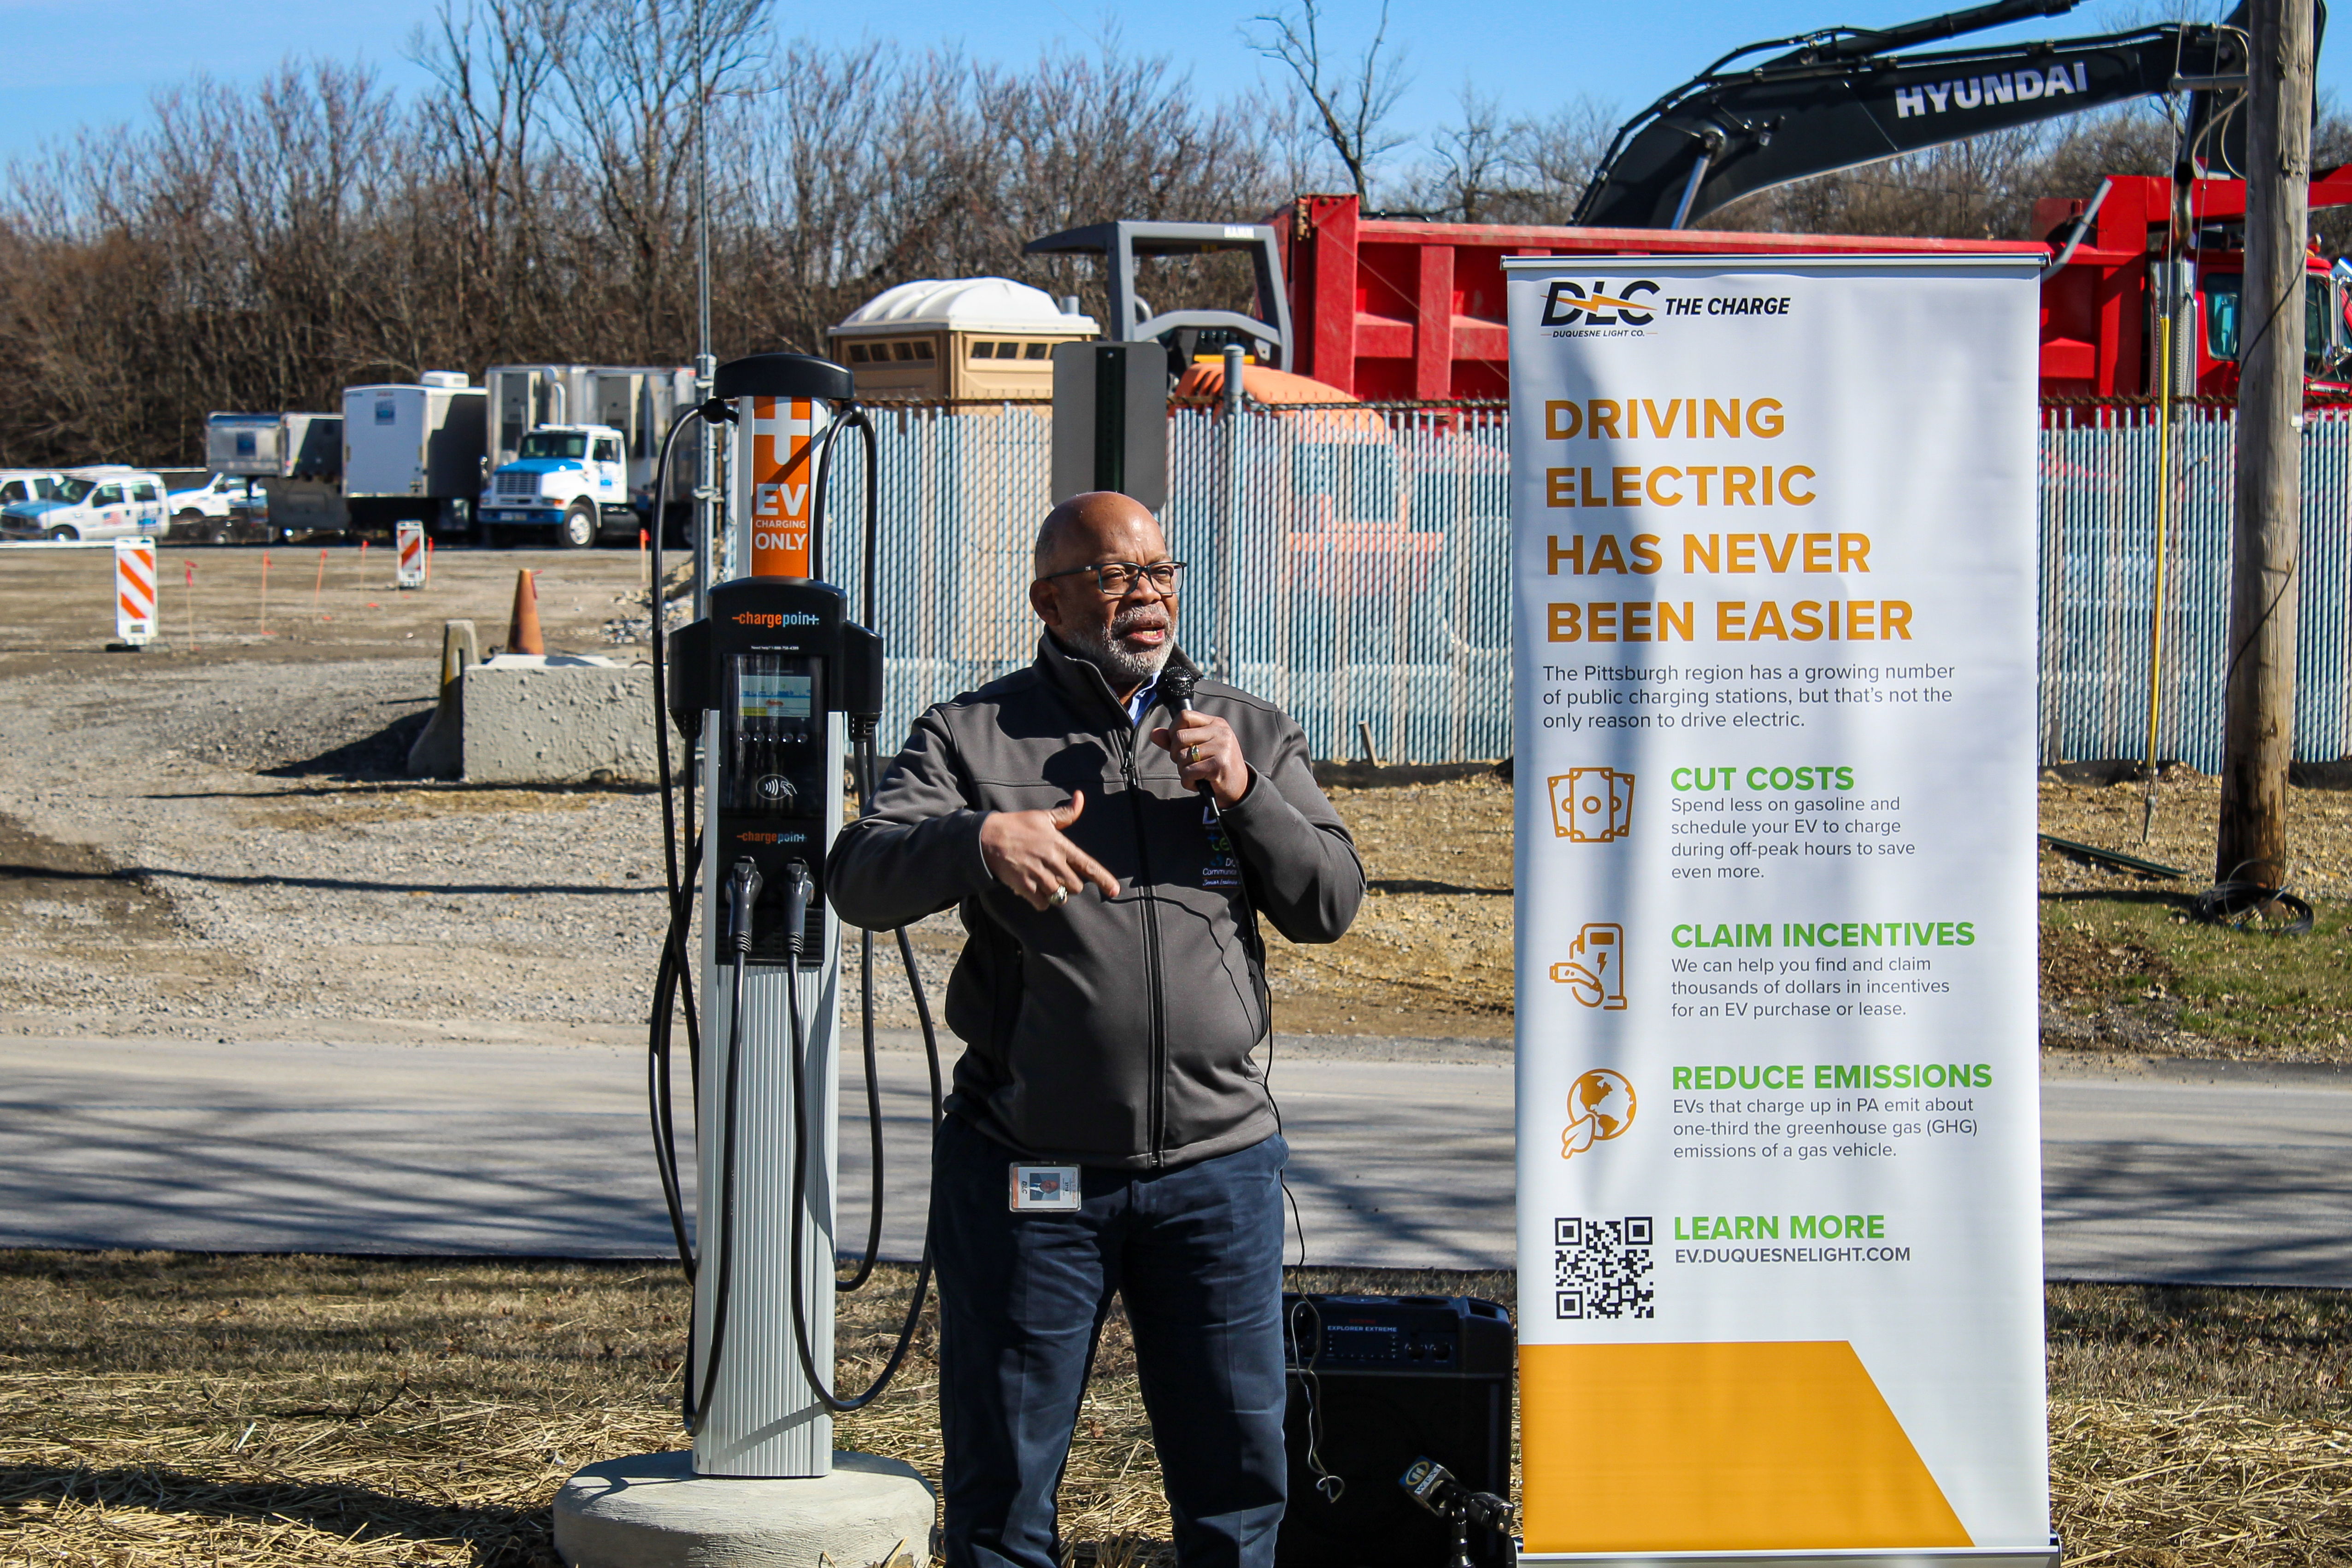 Duquesne Light Company President and CEO Kevin Walker speaks to media at the ribbon-cutting ceremony celebrating the launch of electric vehicle fleet charging in West Mifflin.